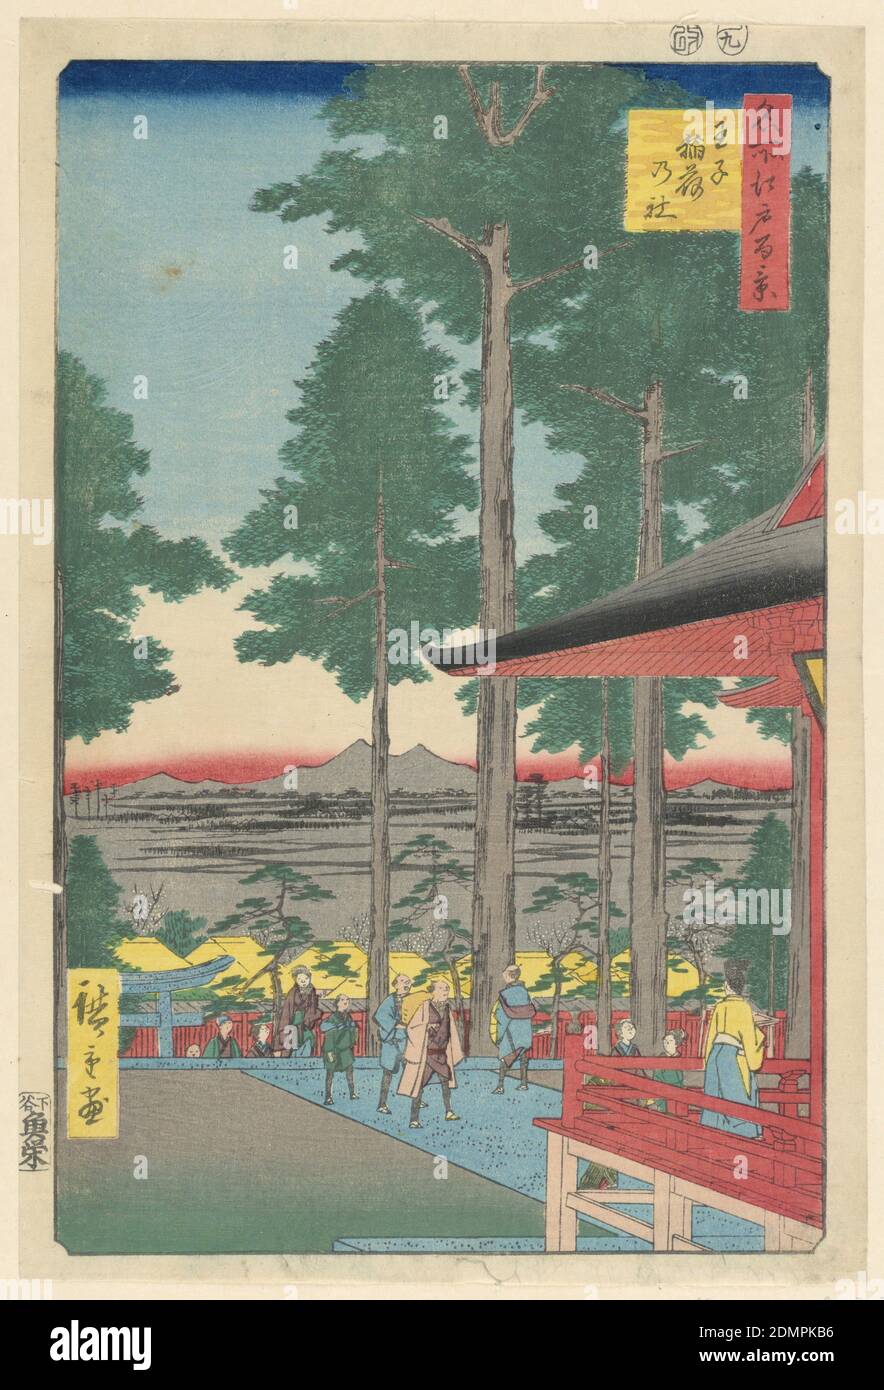 Inari Shrine at Oji (Oji Inari no yashiro) From the Series One Hundred Famous views of Edo, Ando Hiroshige, Japanese, 1797–1858, Woodblock print in colored ink on paper, The Oji Inari Shrine was the oldest shrine in the Kanto district. The village of Oji dedicated the shrine to the rice deity Inari. Every autumn farmers and pilgrims would visit to pay homage for a good harvest. During the New Year, they would wish for health and prosperity. Inari was one of the most popular deities. His shrines were often guarded by a pair of foxes, (kitsune) Stock Photo